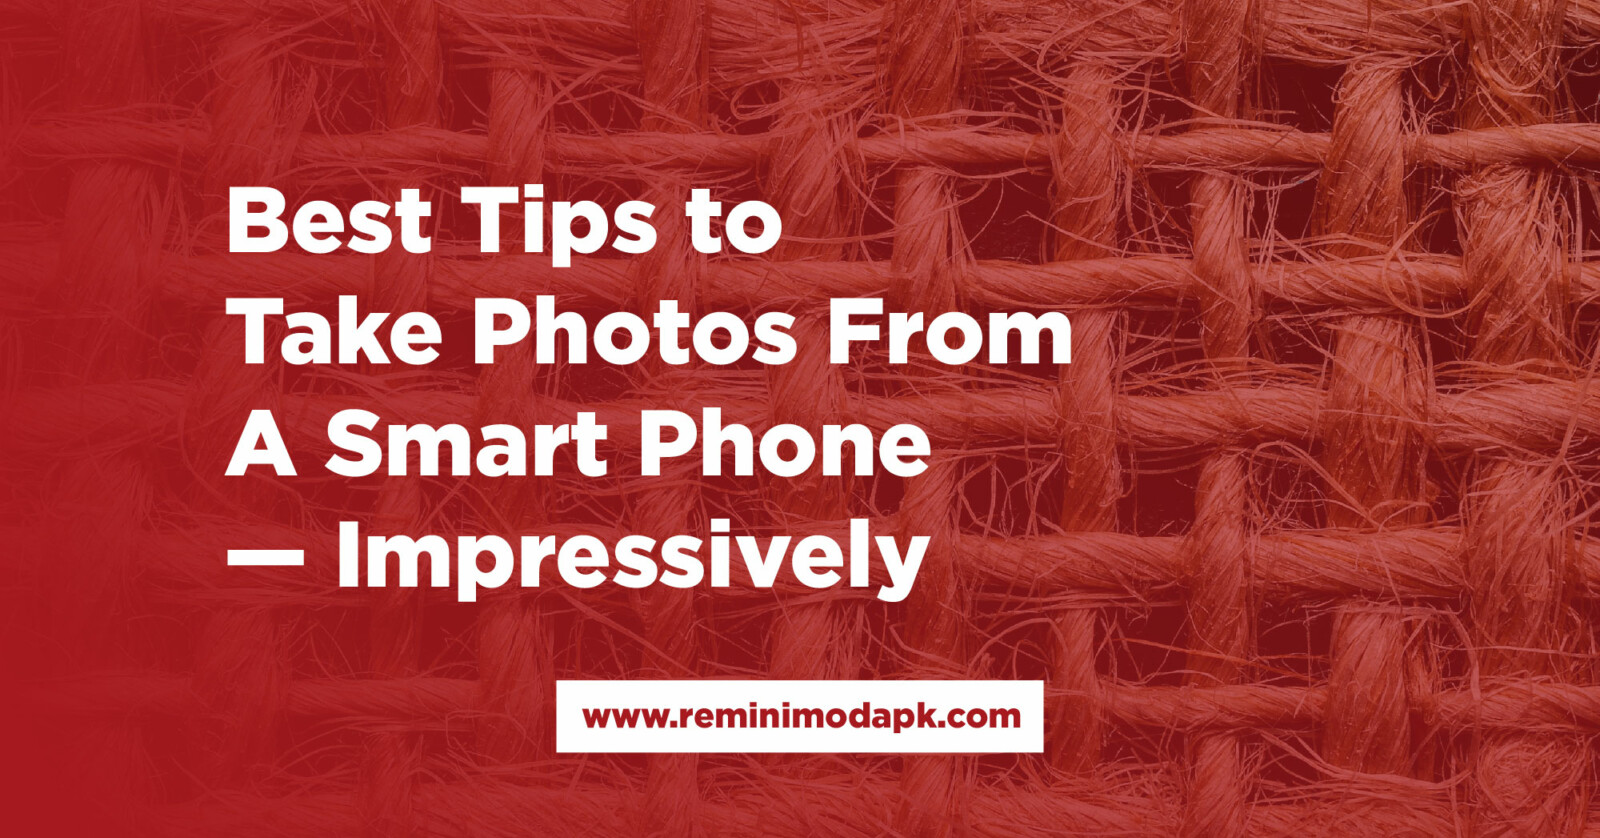 Best Tips to Take Photos From A Smart Phone — Impressively